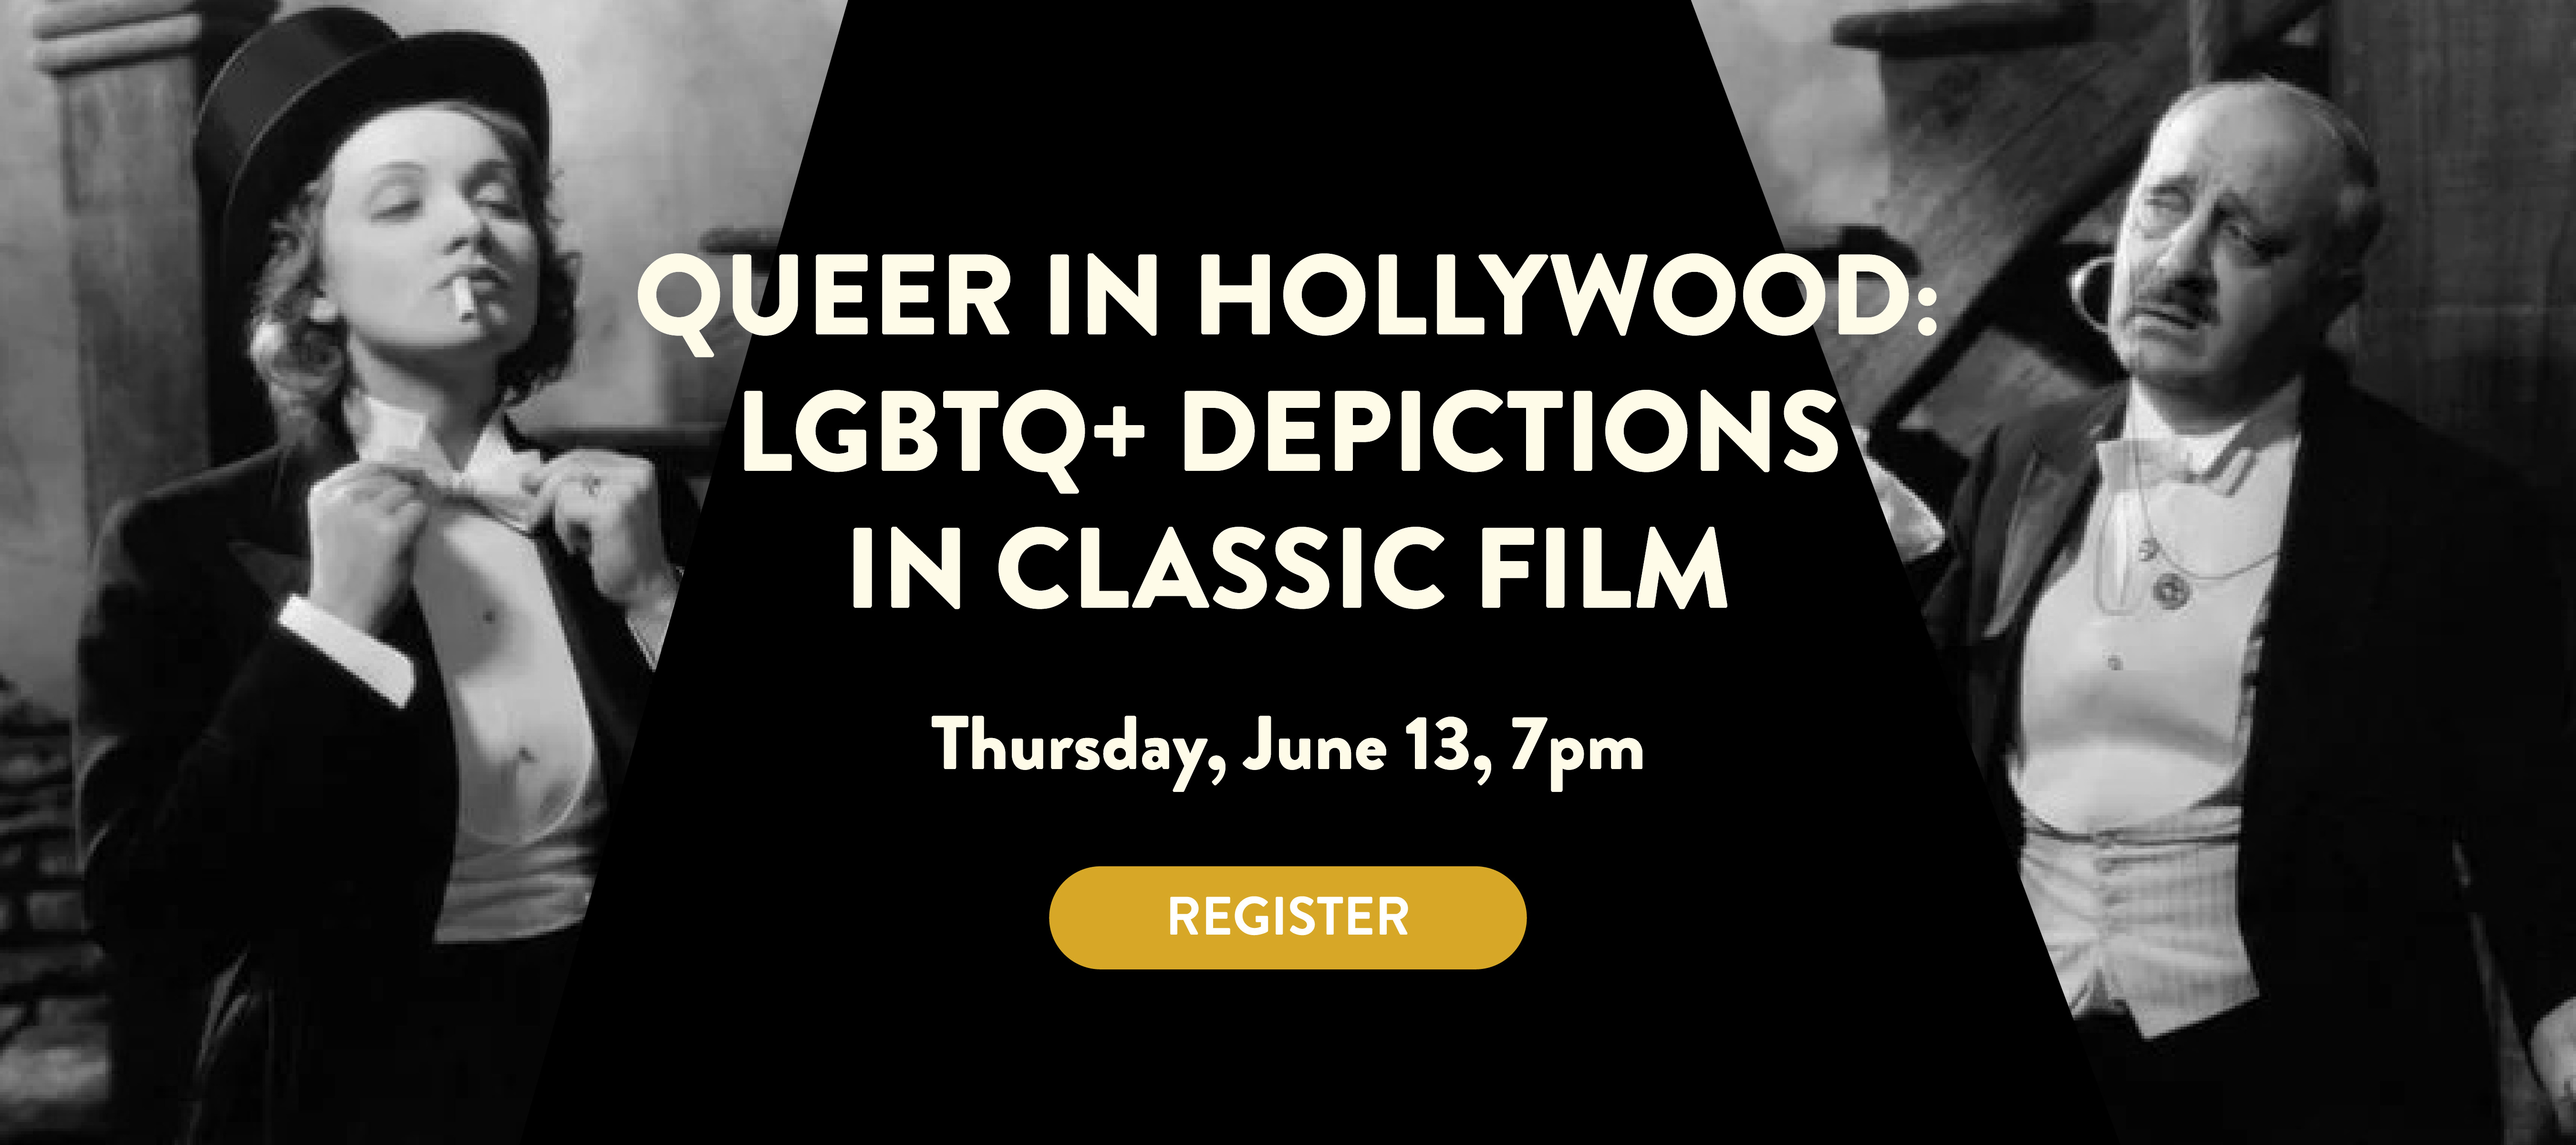 phpl, Prospect Heights Public Library, QUEER IN HOLLYWOOD: LGBTQ+ DEPICTIONS IN CLASSIC FILM, celebrate pride month, film historian, groundbreaking portrayals, video clips, Adult